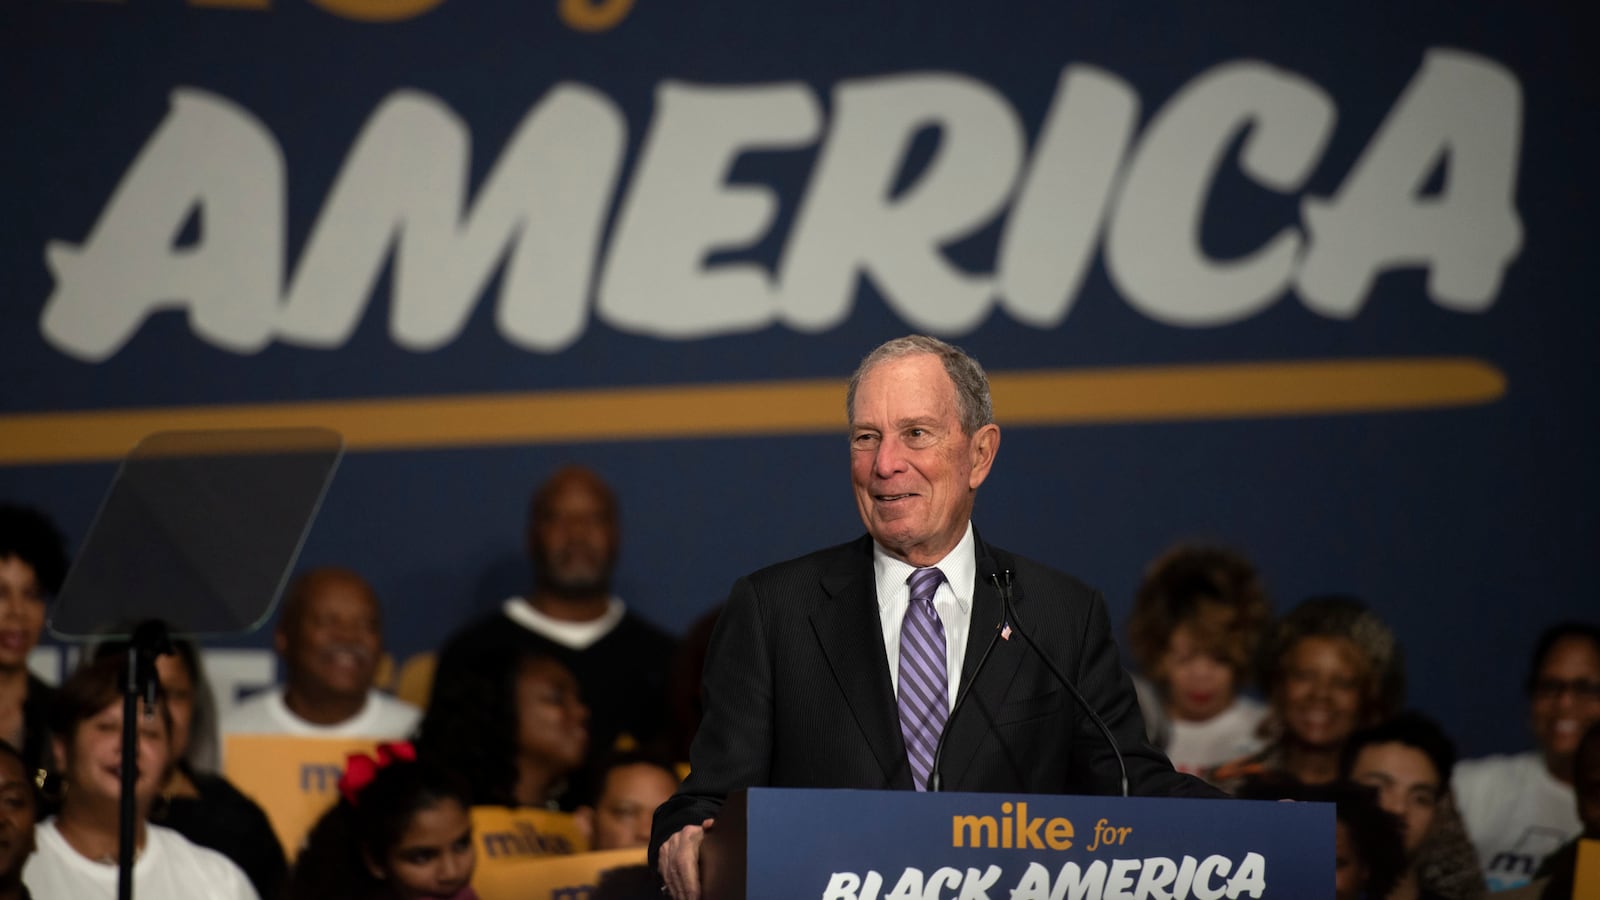 HOUSTON, TX - FEBRUARY 13: Democratic presidential candidate Mike Bloomberg speaks to the crowd on February 13, 2020 in Houston, Texas. The former New York City mayor launched "Mike for Black America," an effort to focus on key issues relating to black Americans on his fifth campaign trip to Texas.  (Photo by Callaghan O'Hare/Getty Images)